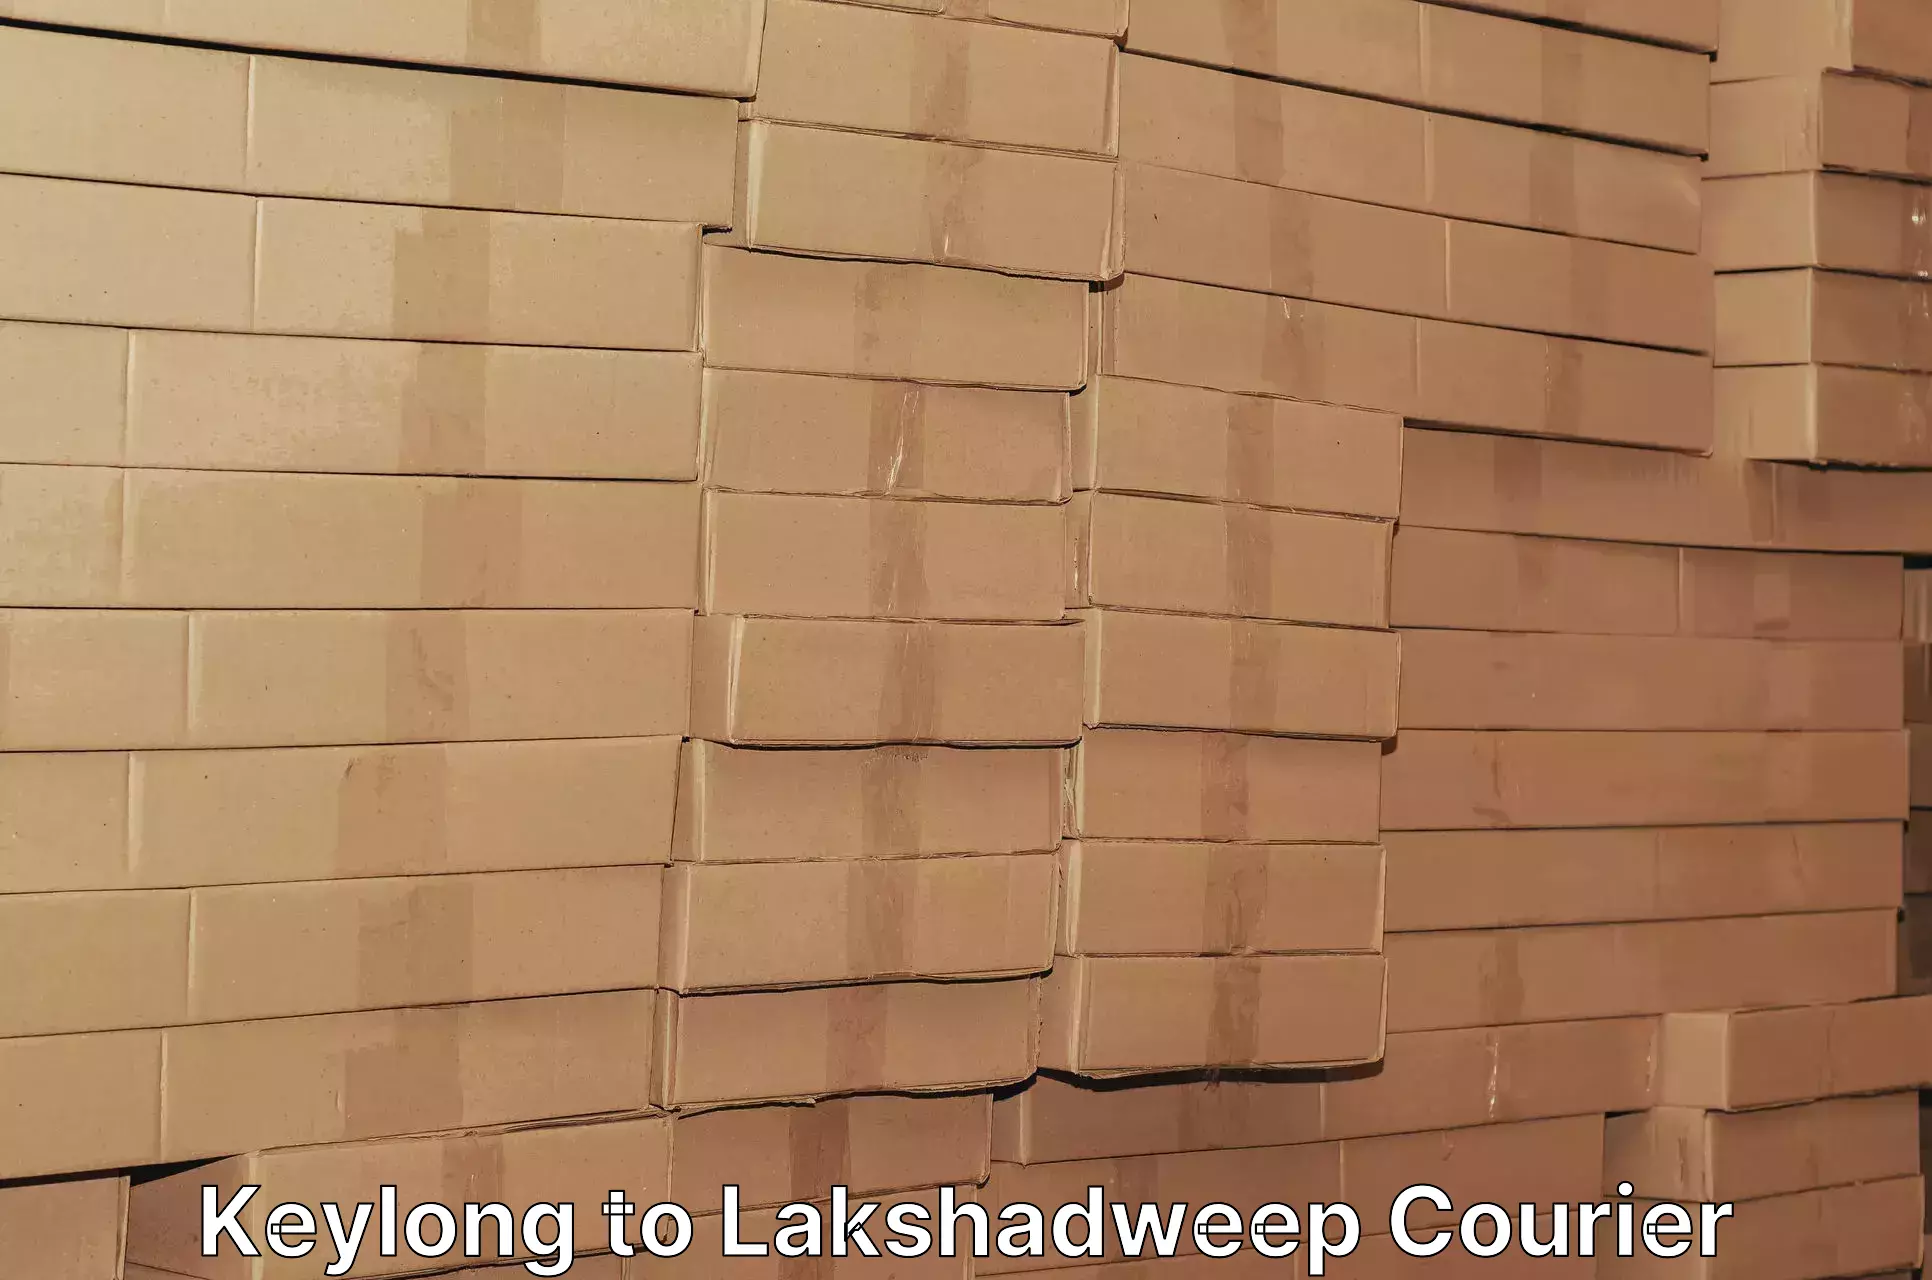 Courier service efficiency Keylong to Lakshadweep